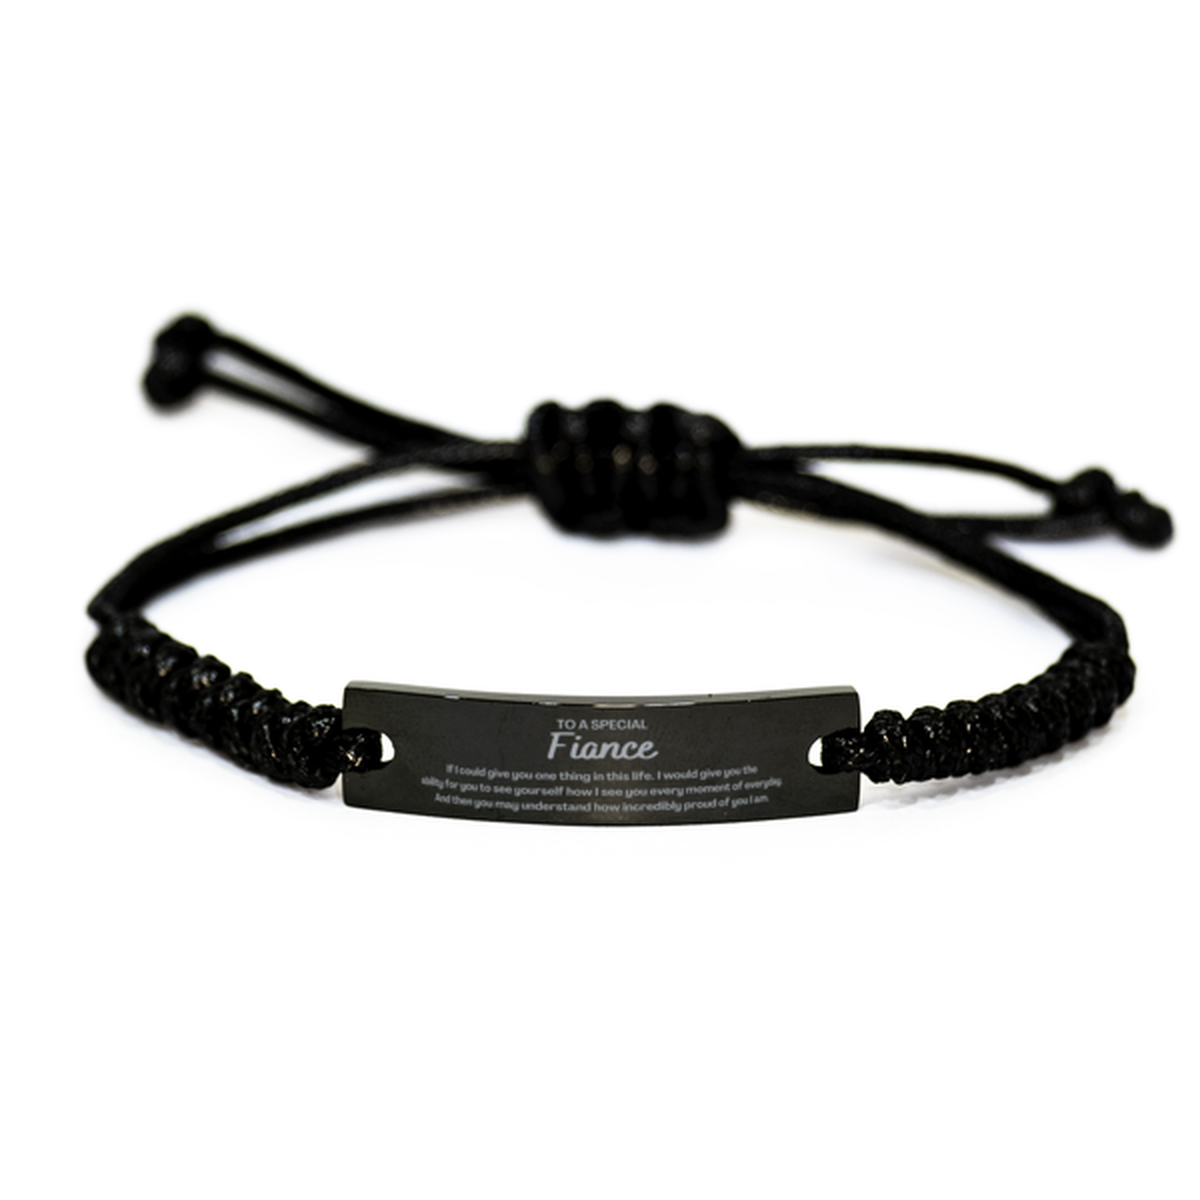 To My Fiance Black Rope Bracelet, Gifts For Fiance Engraved, Inspirational Gifts for Christmas Birthday, Epic Gifts for Fiance To A Special Fiance how incredibly proud of you I am